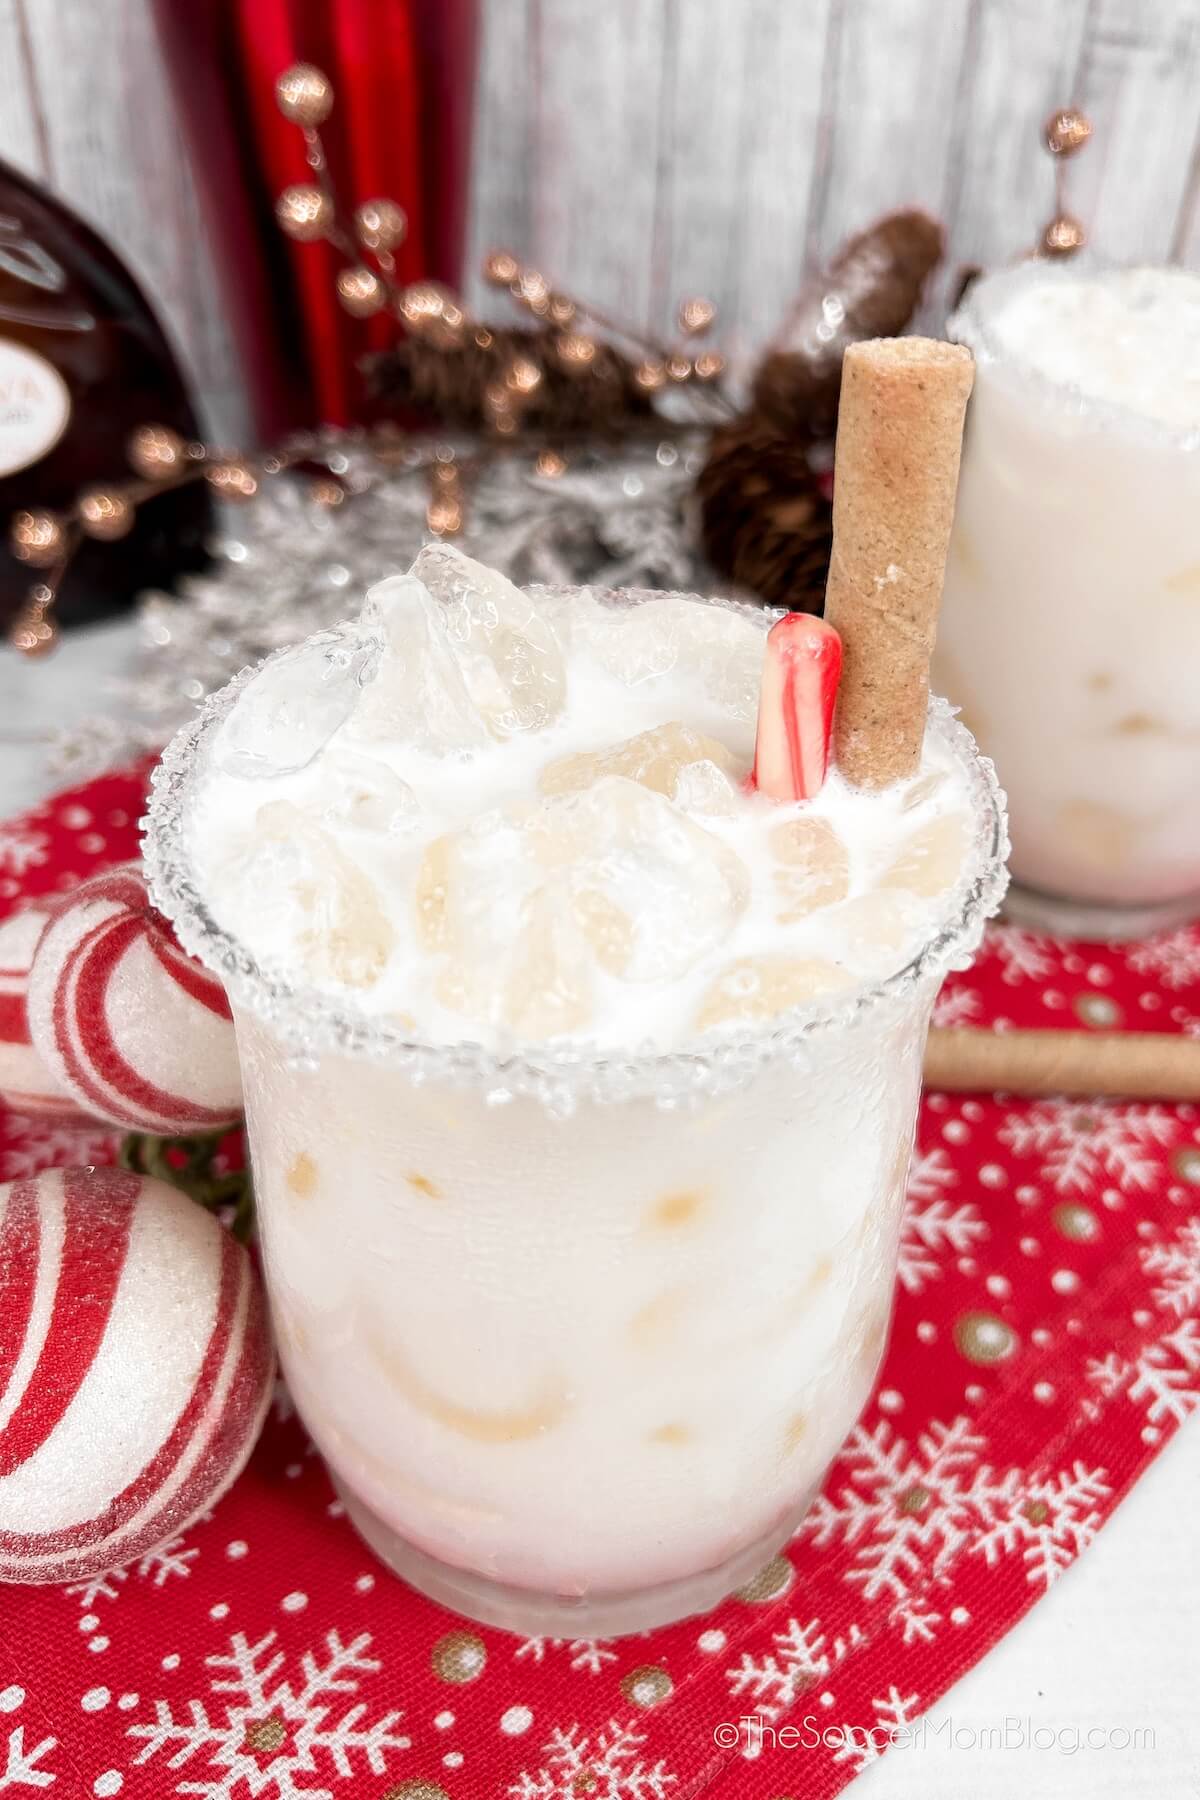 Christmas White Russian, surrounded by candy cane striped ornament balls.